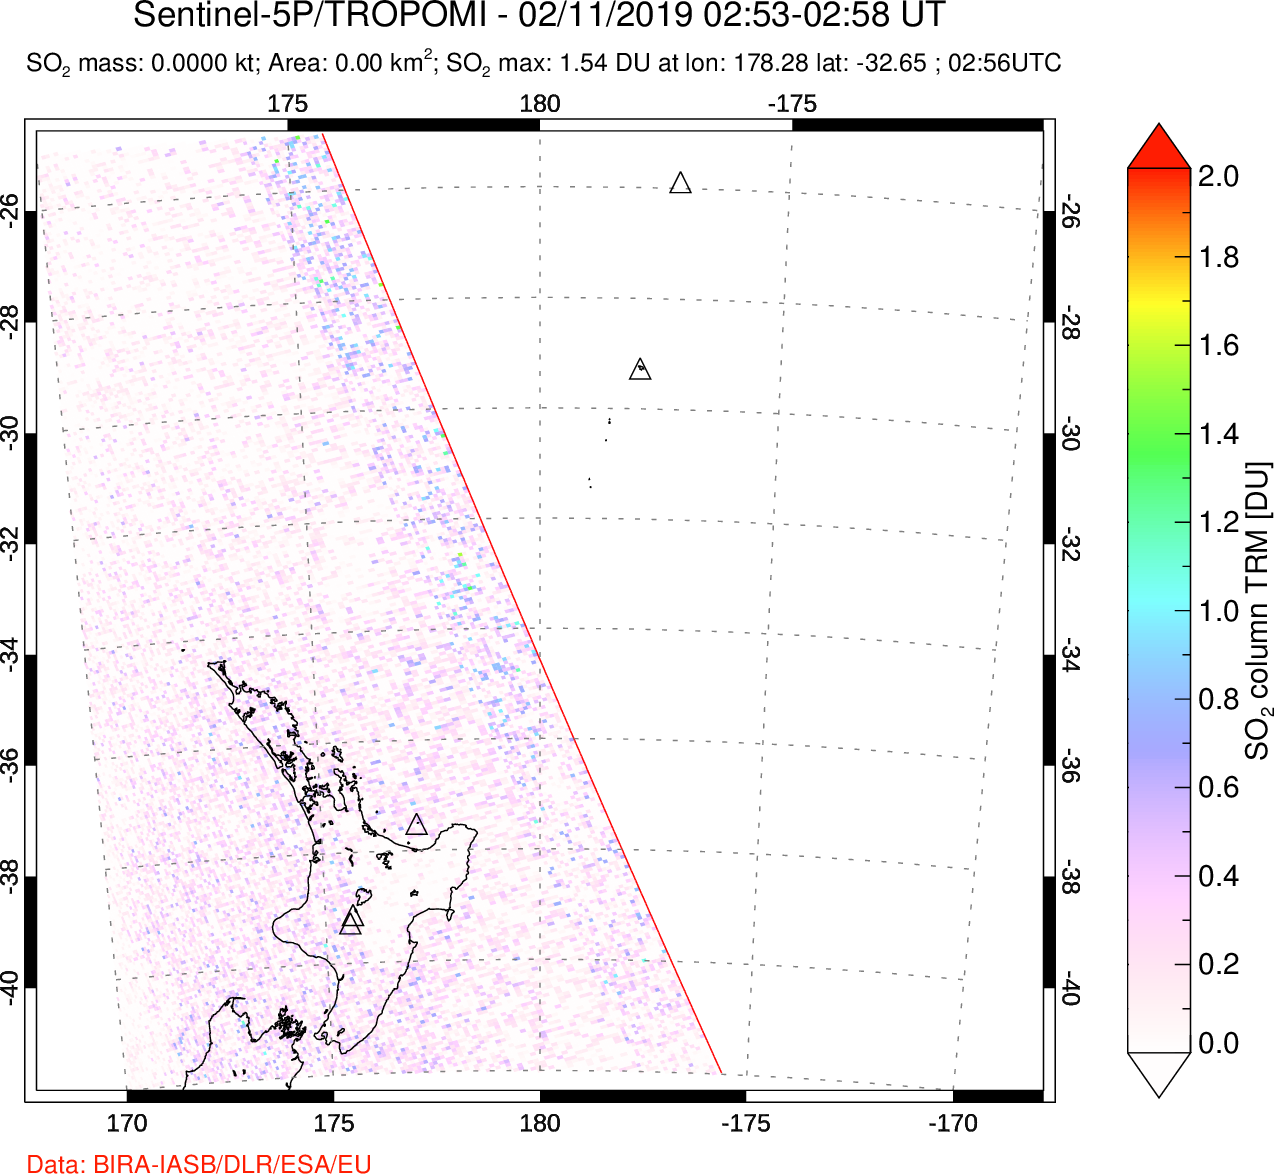 A sulfur dioxide image over New Zealand on Feb 11, 2019.